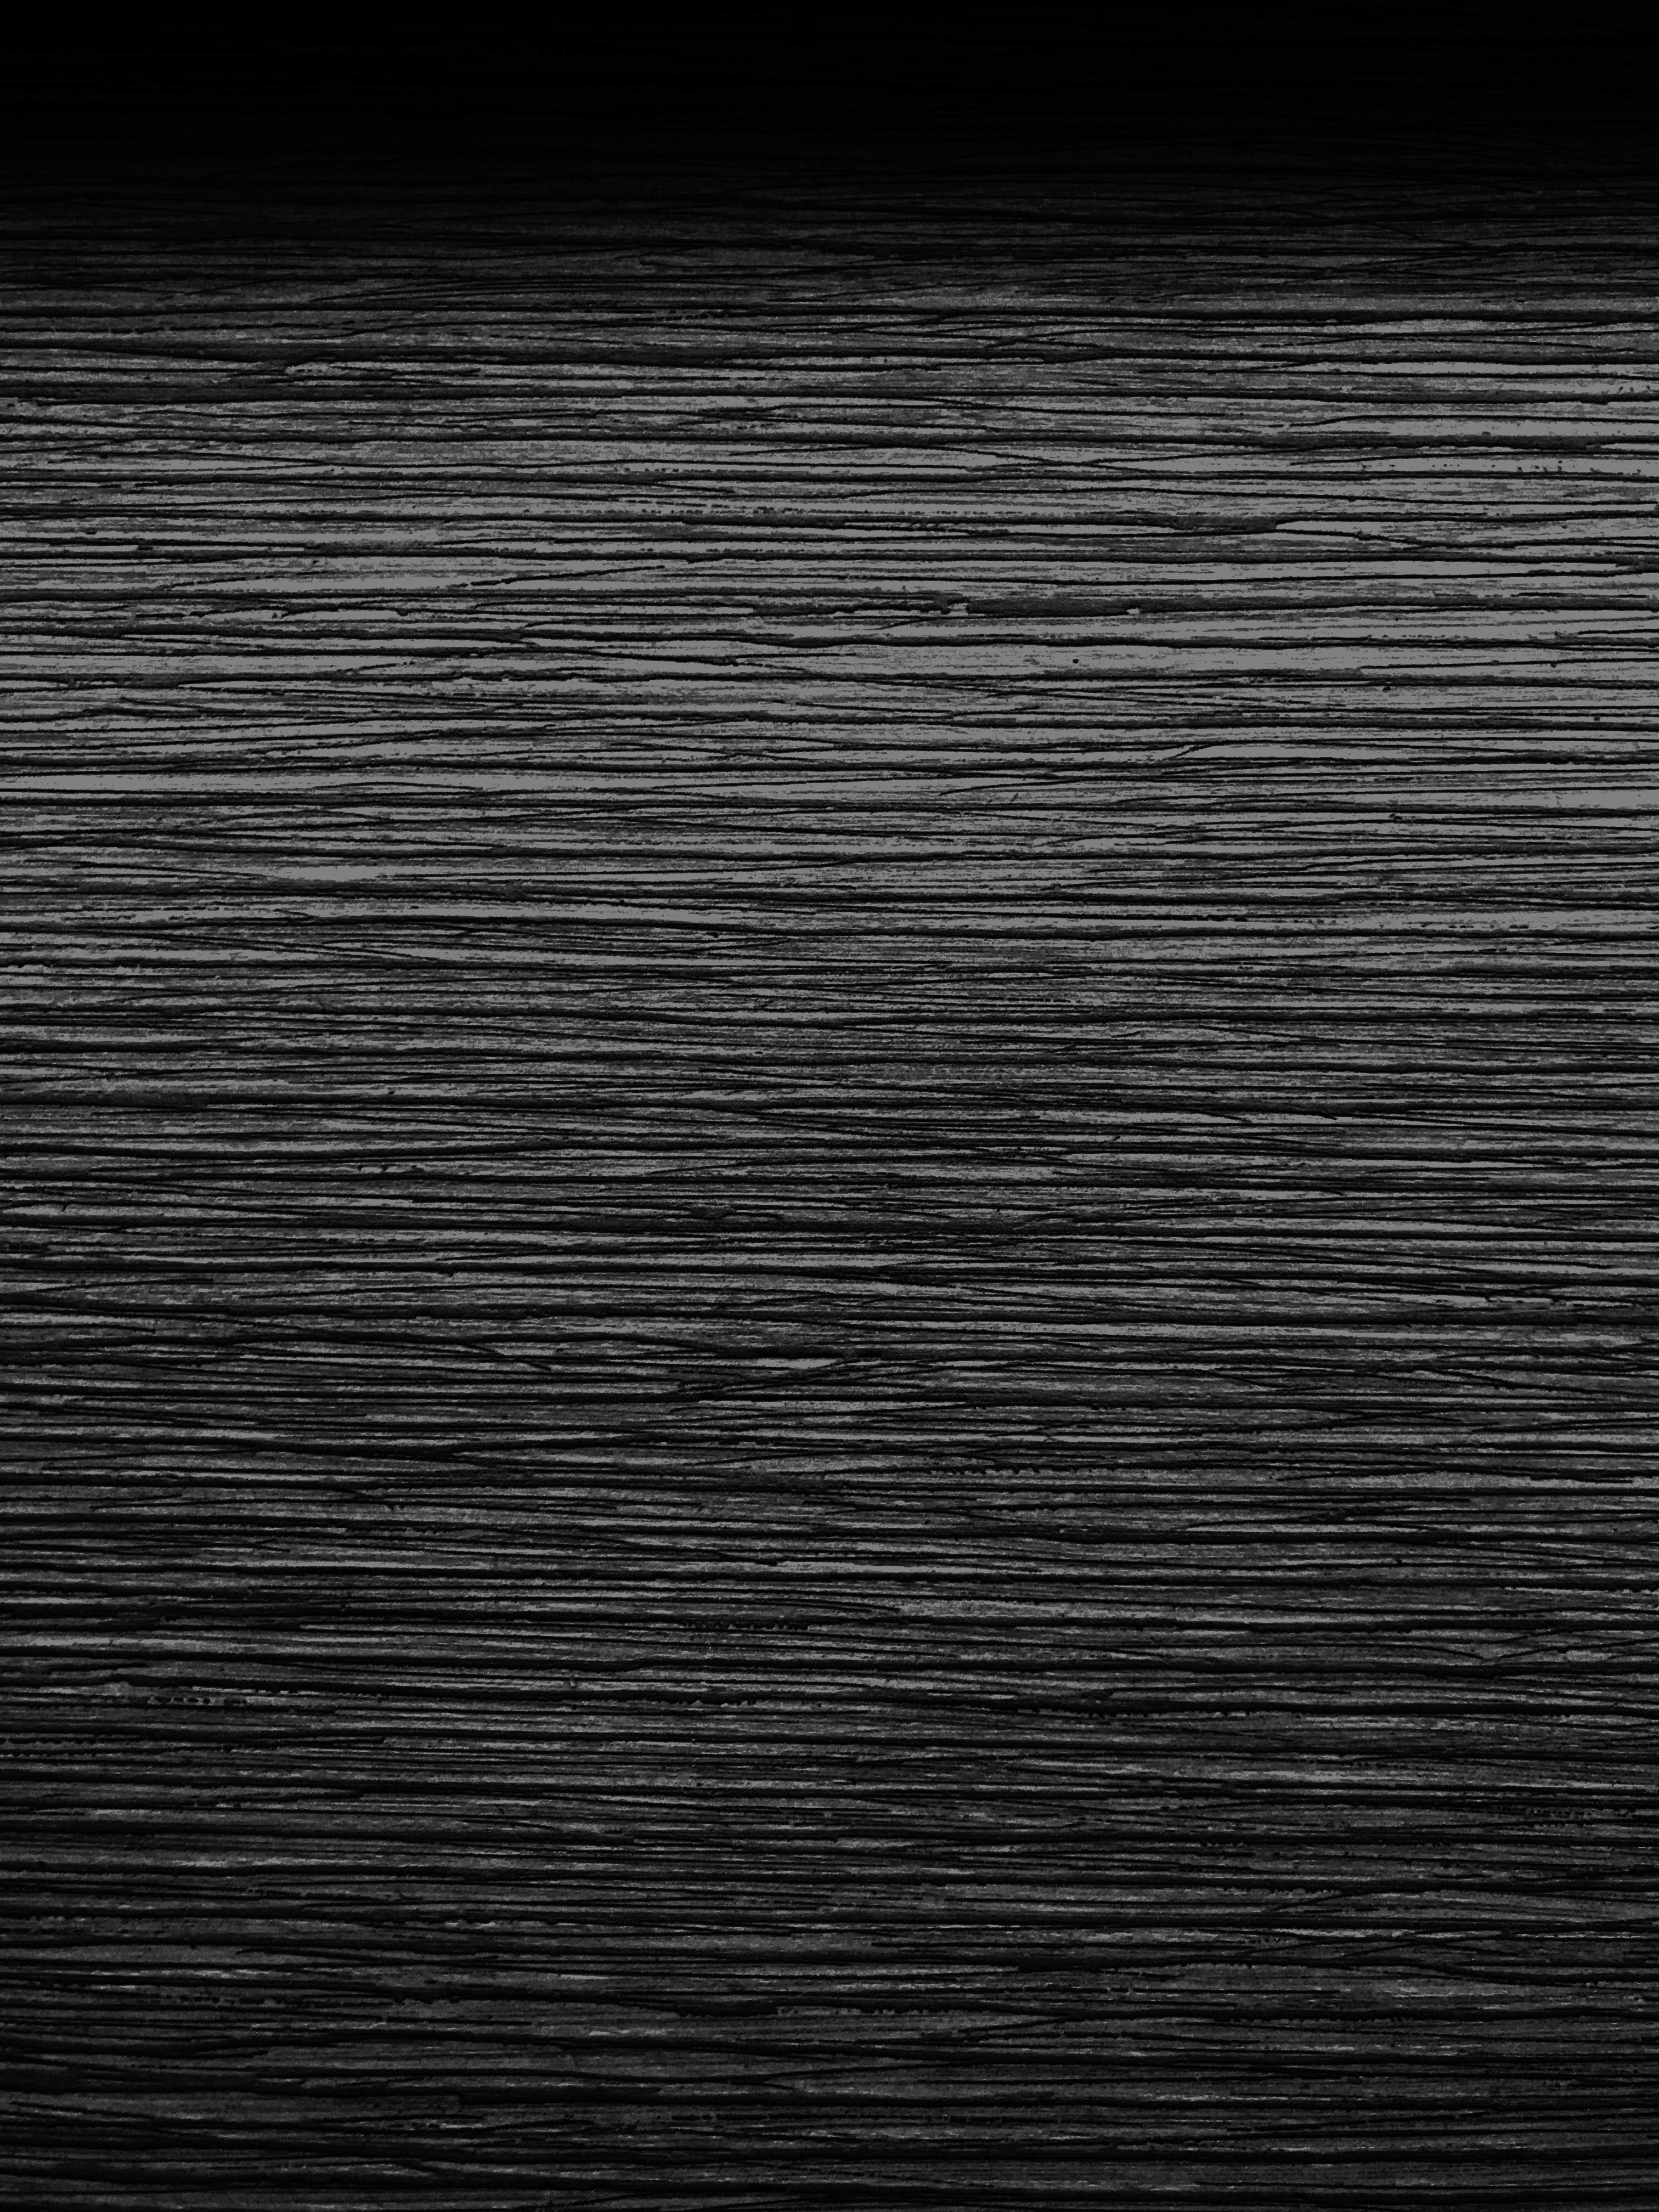 android wooden, rugged, textures, black, wood, texture, surface, rough, board